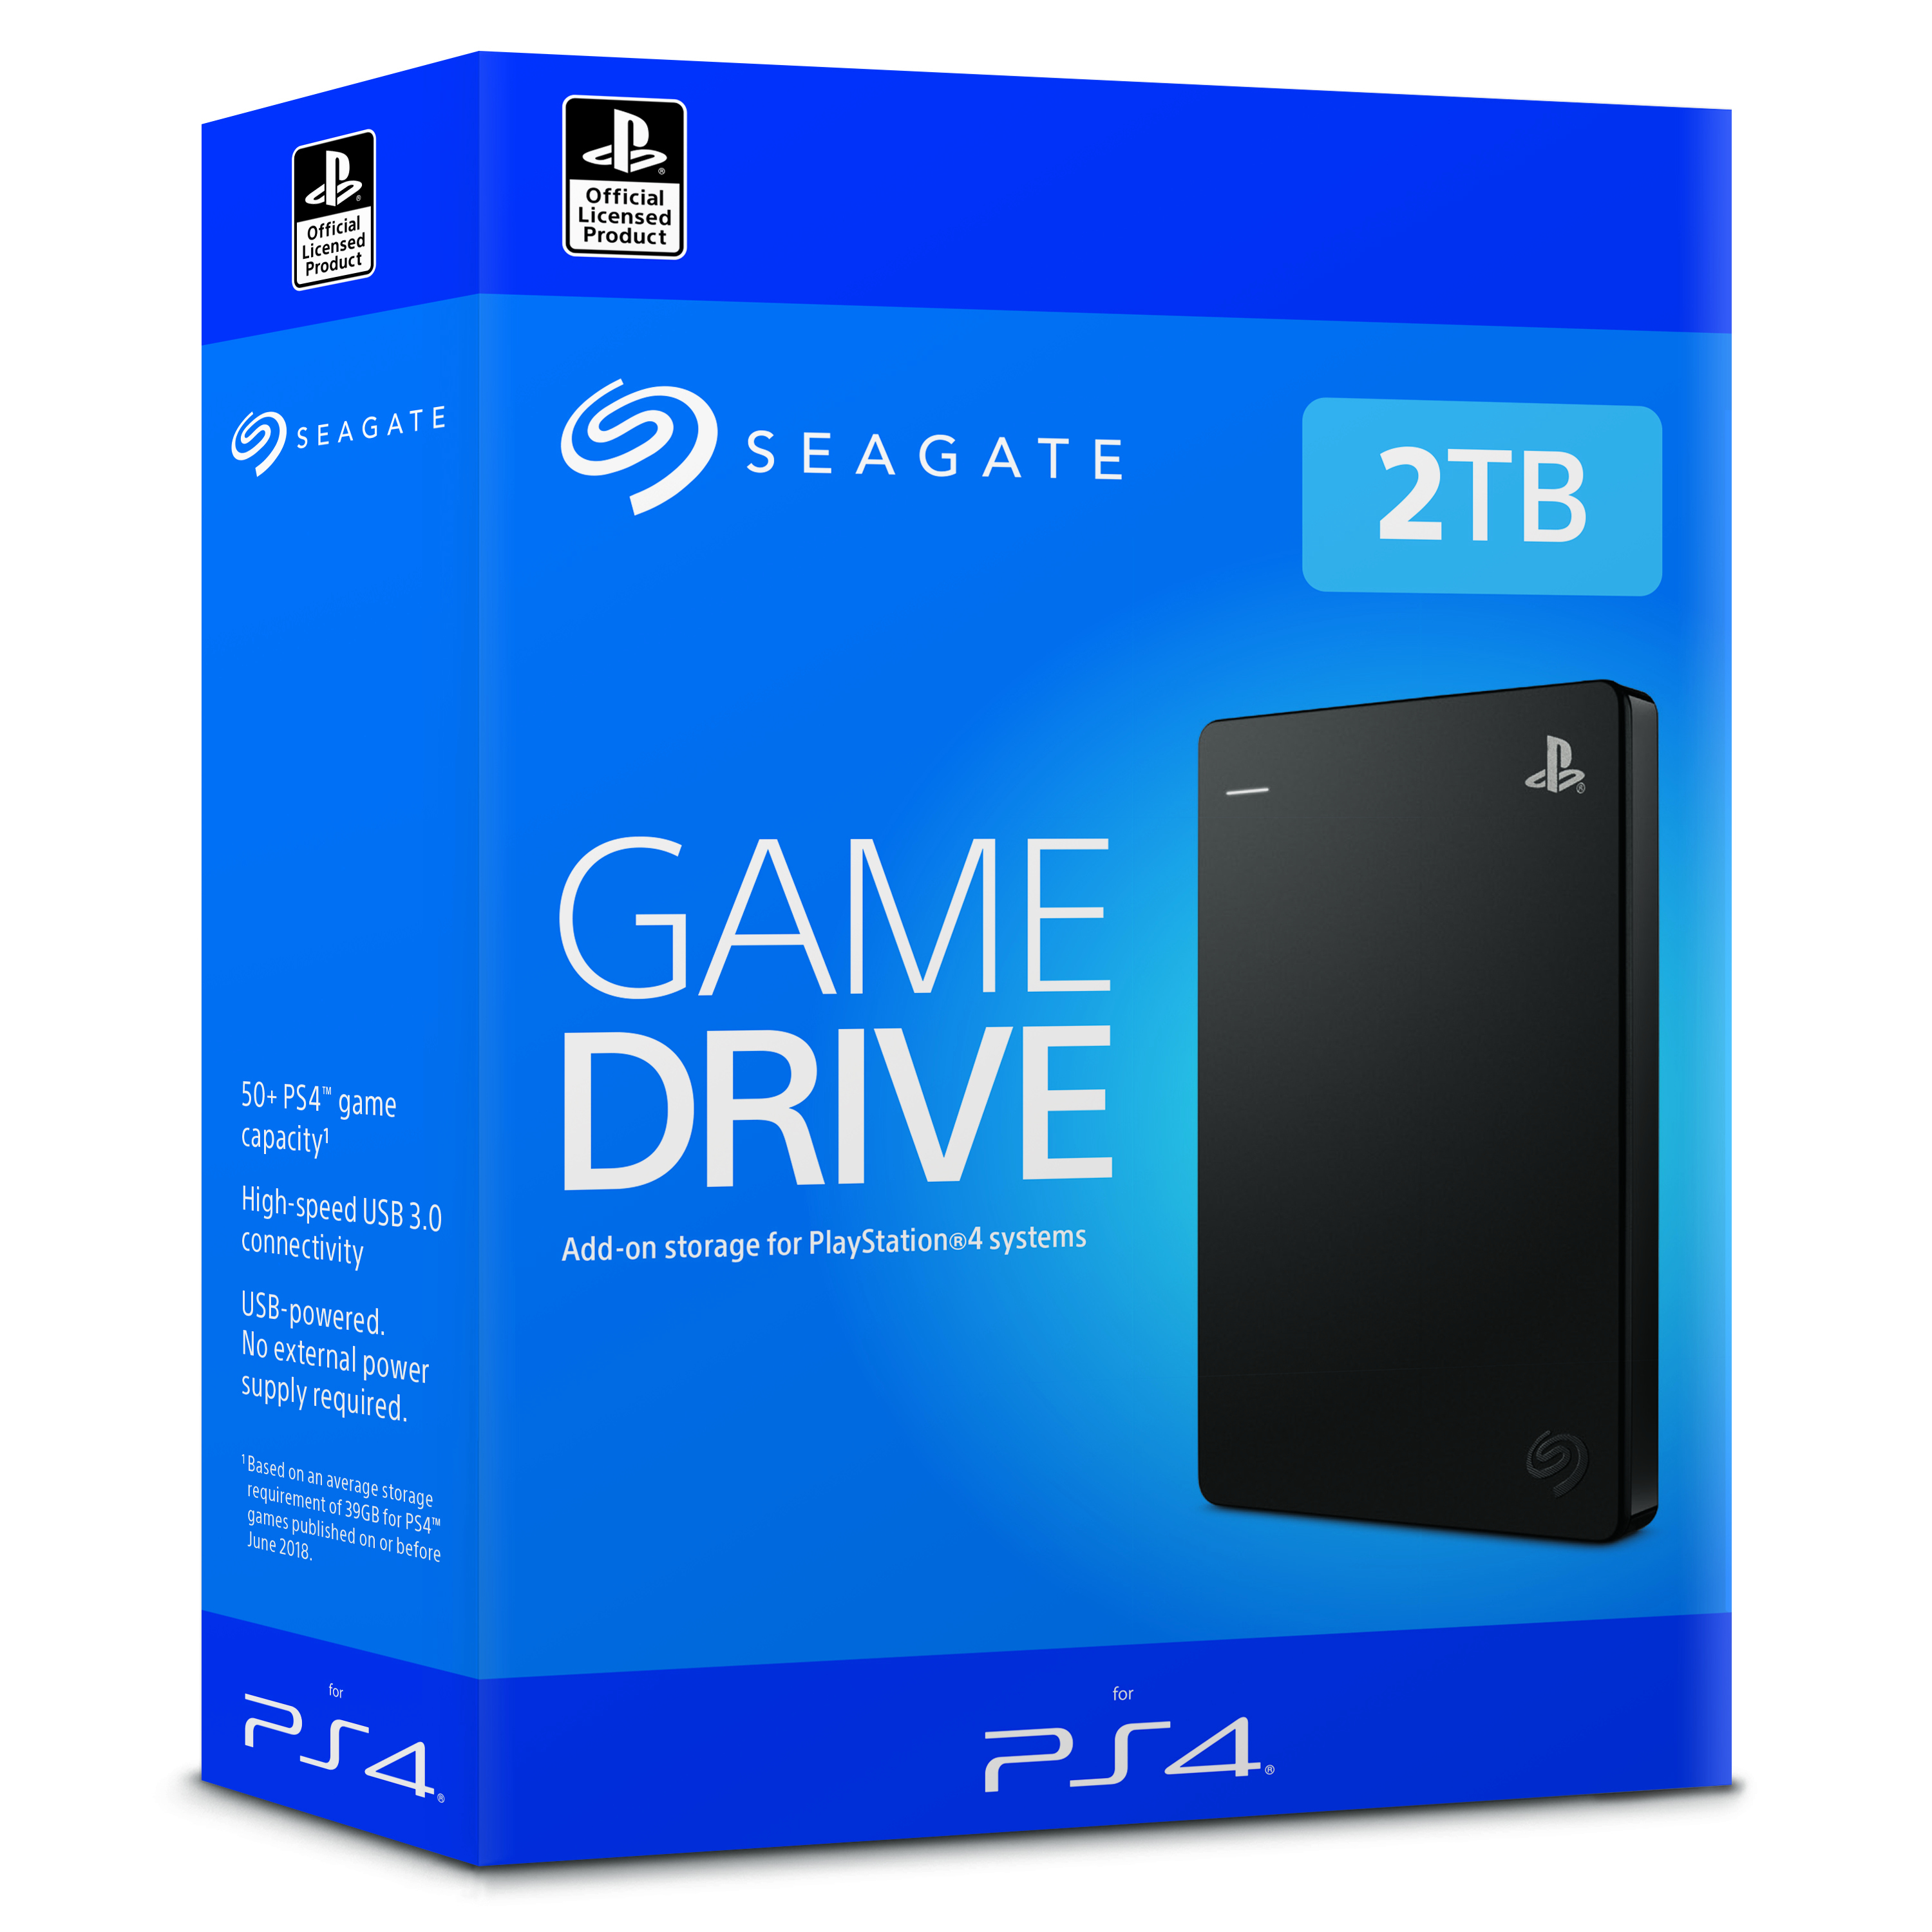 Seagate STGD2000200 | Seagate - (tragbar) Drive Festplatte - TB Game PS4 extern STGD2000200 - for 2